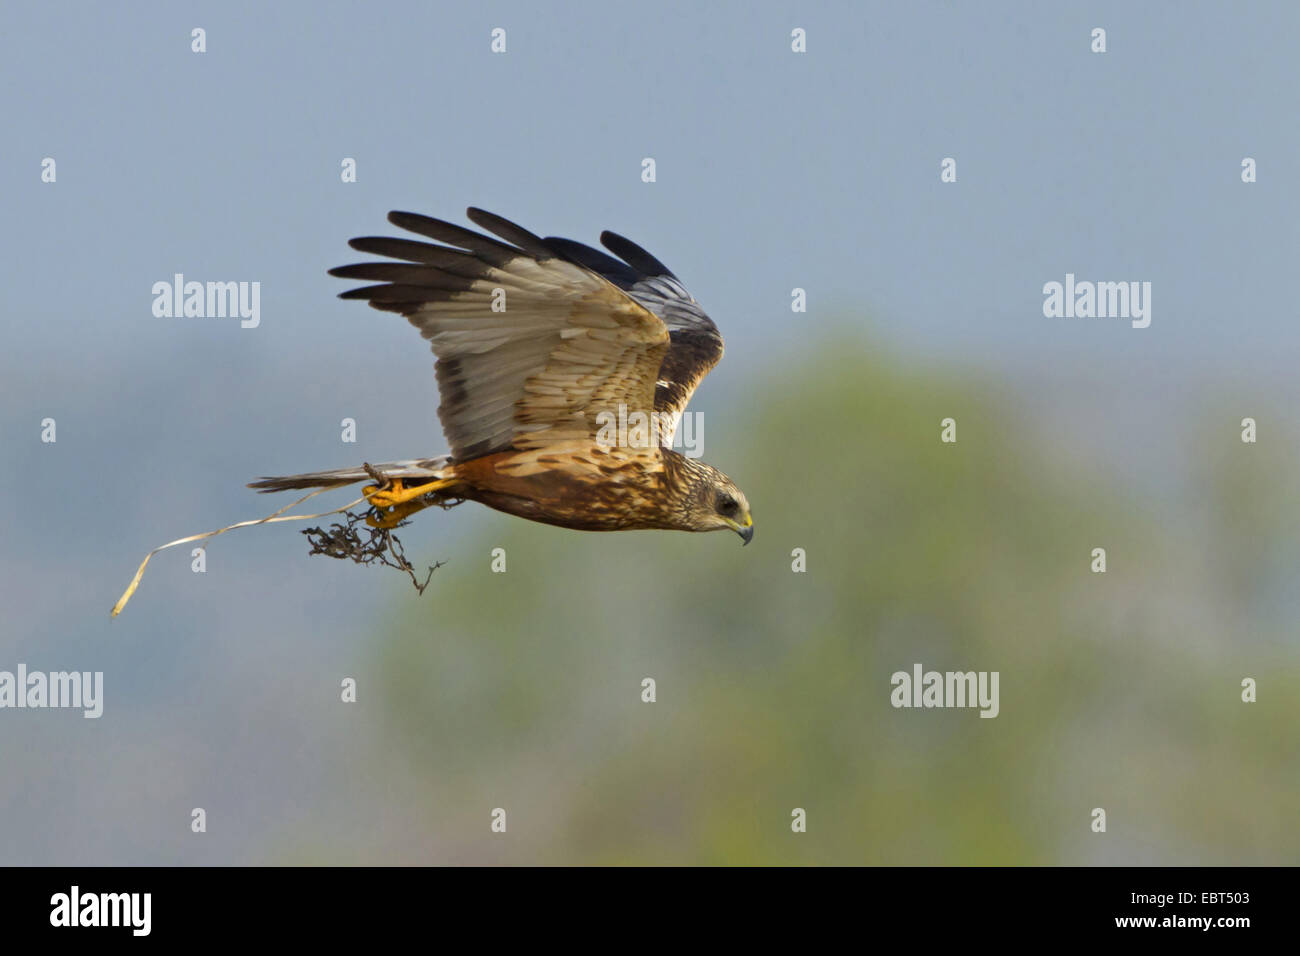 Western Marsh Harrier (Circus aeruginosus), flying with nesting material in the claws, Germany, Rhineland-Palatinate Stock Photo